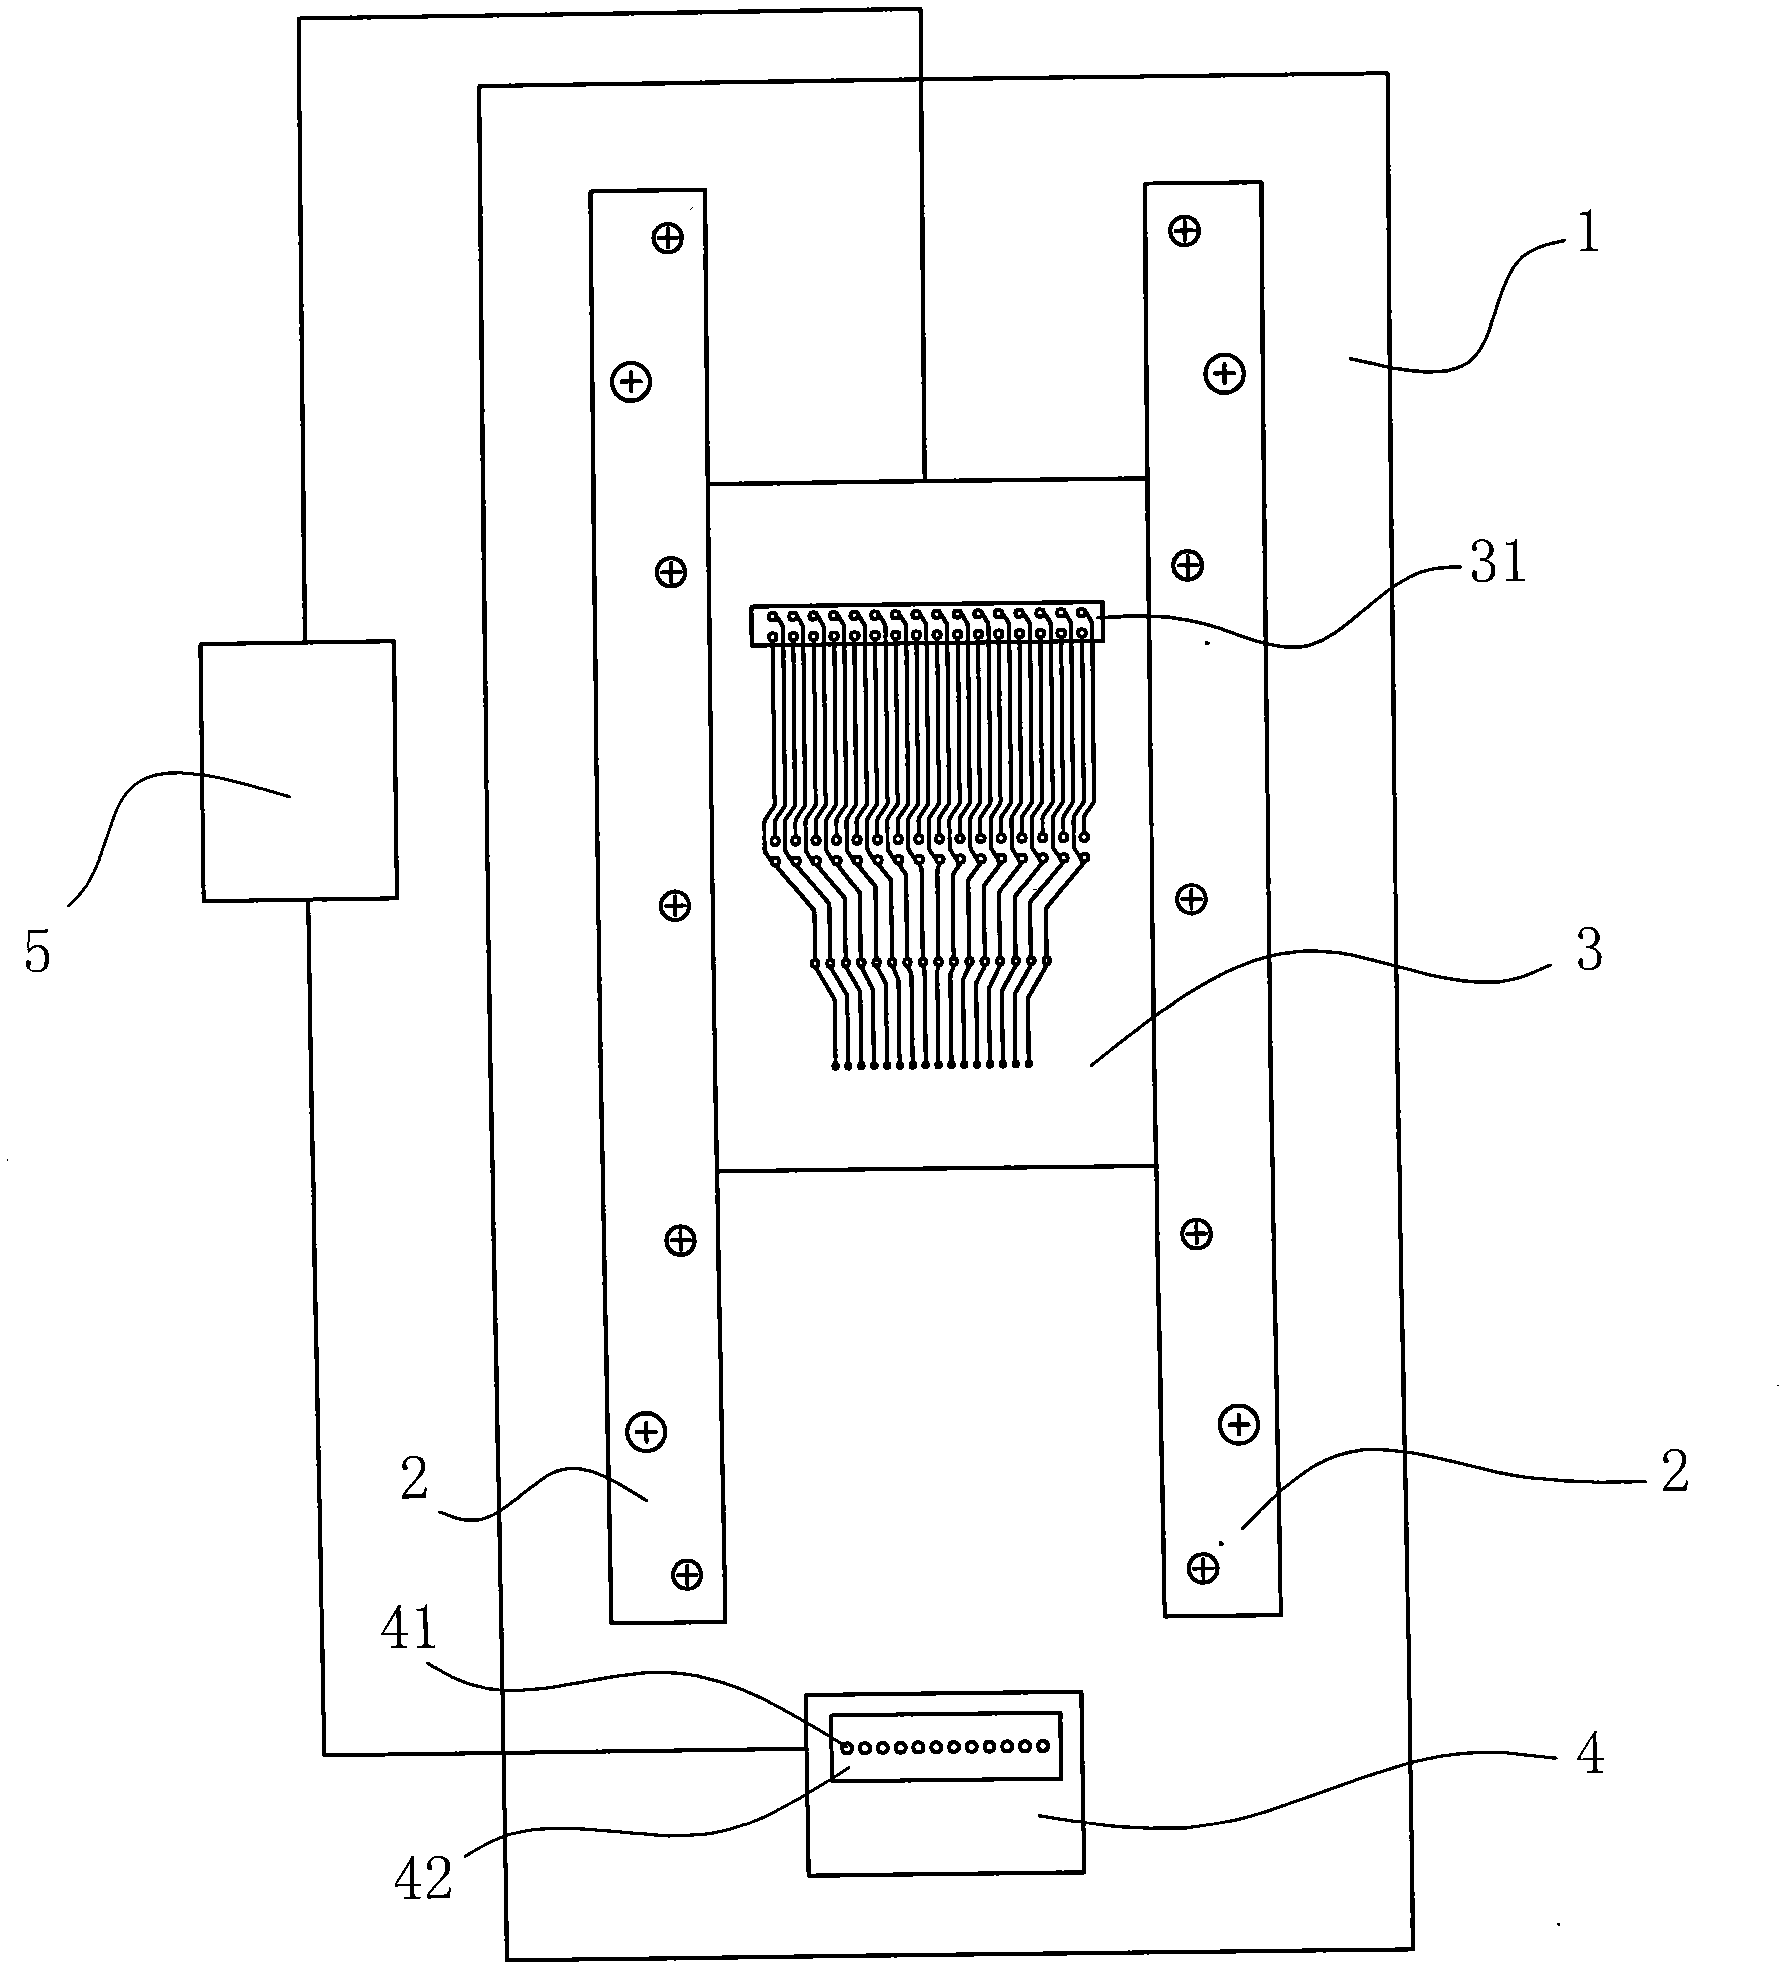 Method for electrical detection on wire harnesses of different sizes and universal test fixture